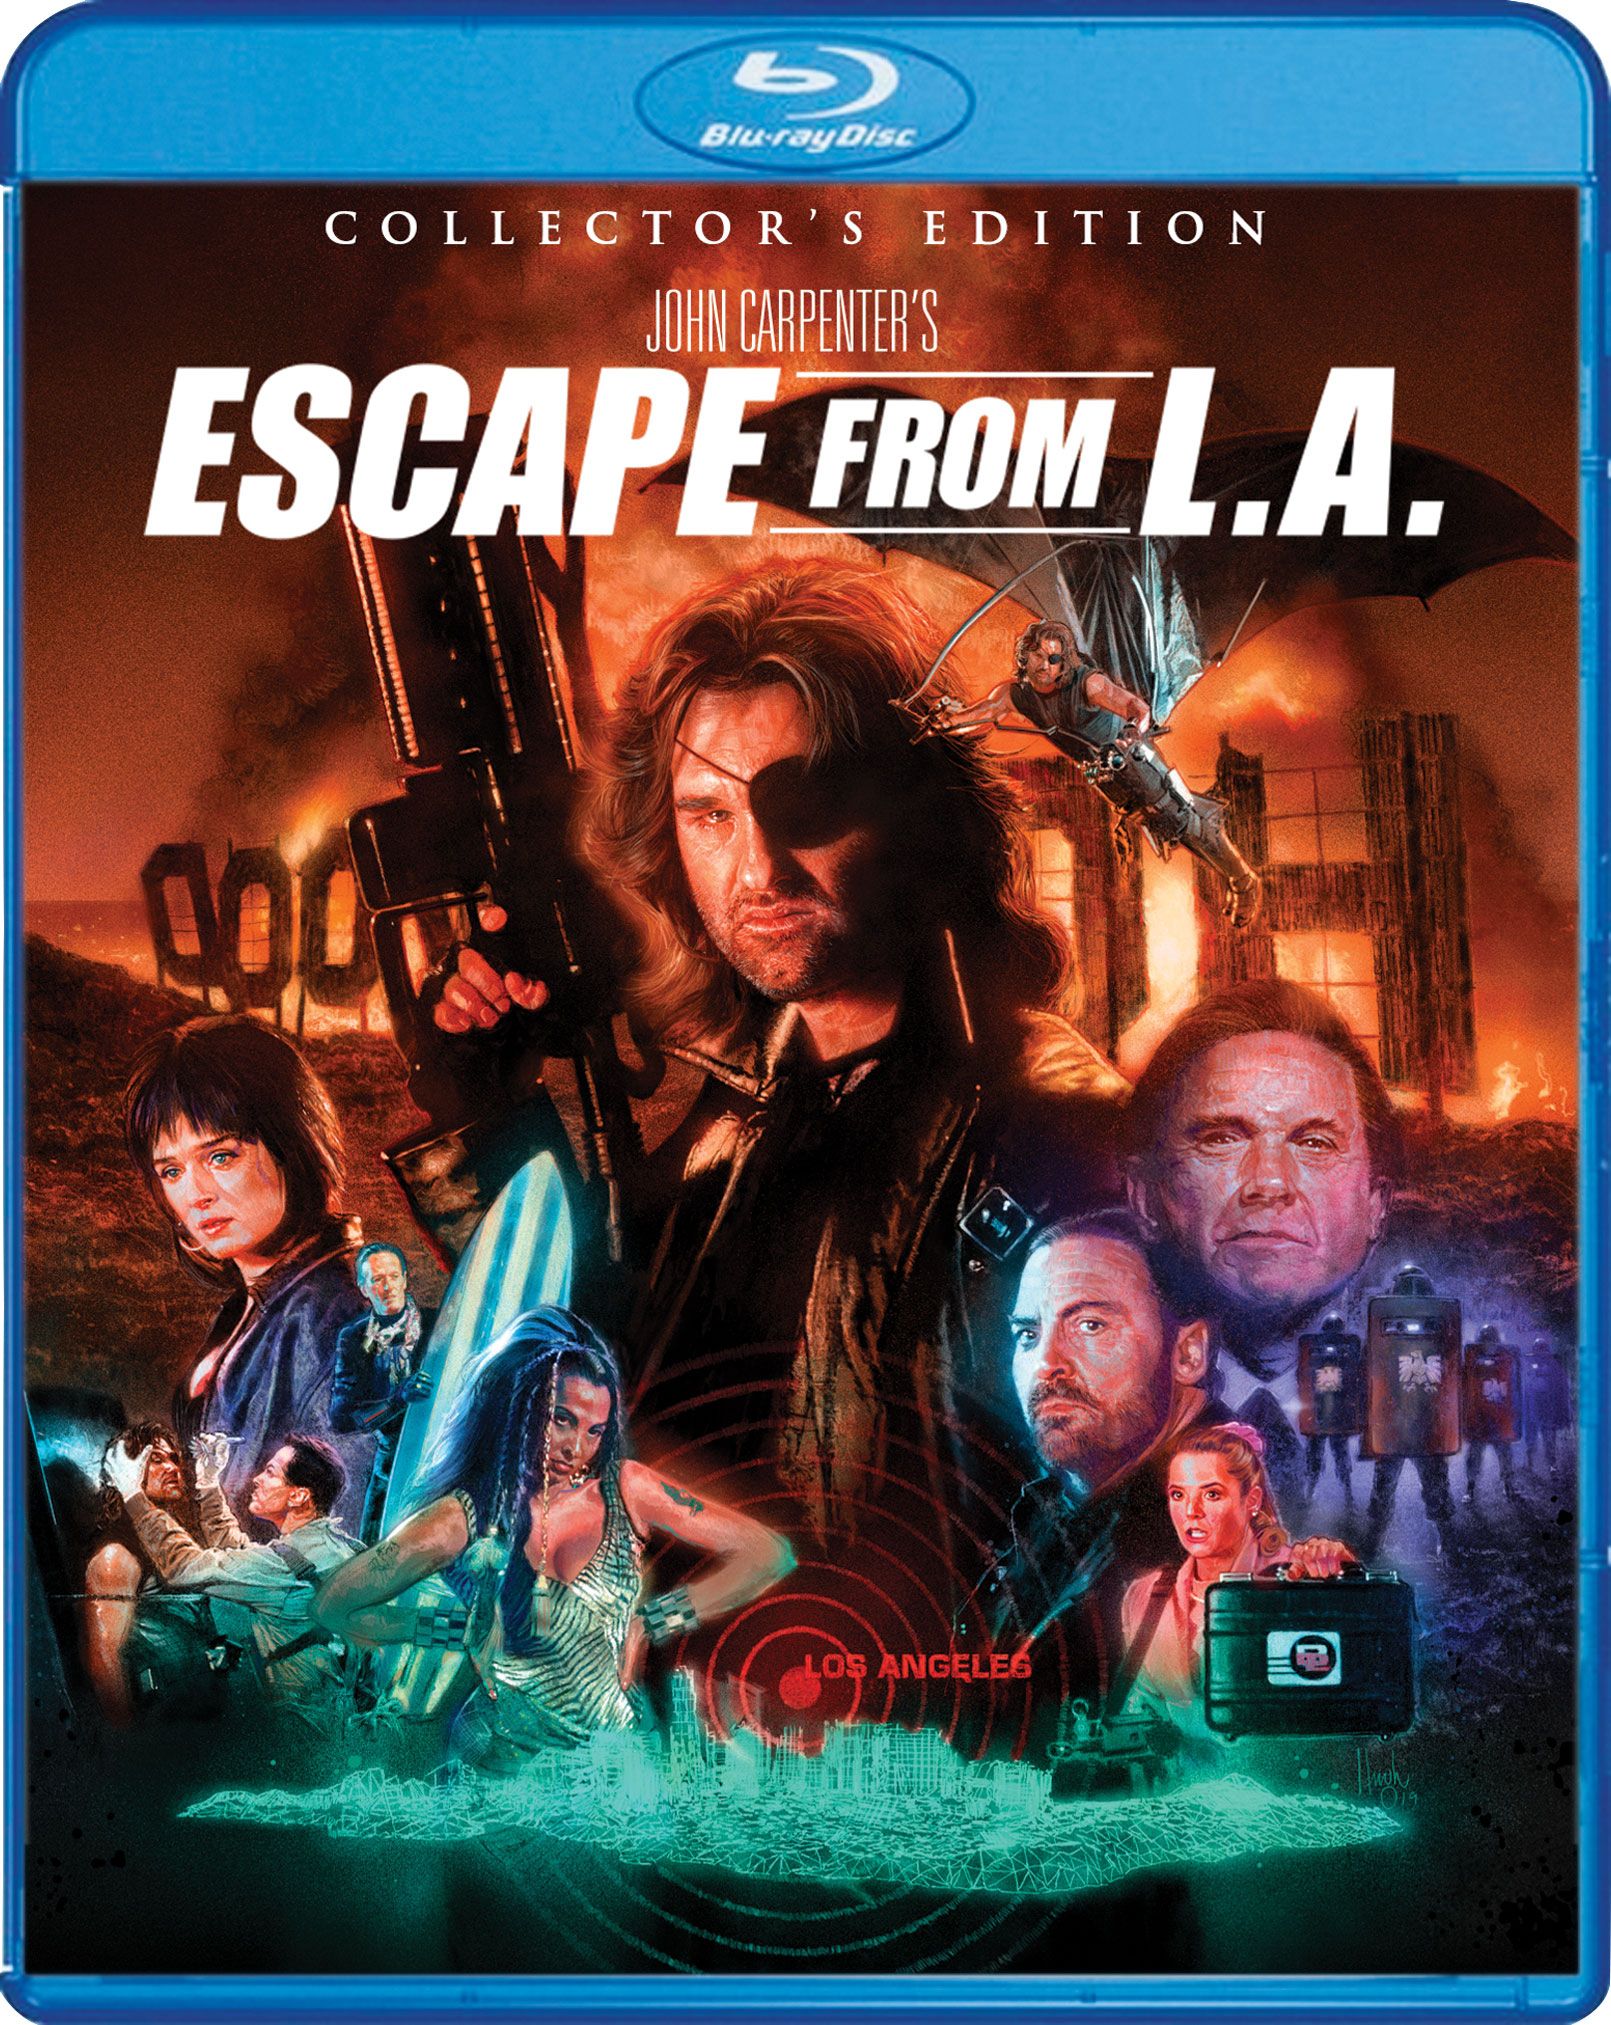 Escape from L.A. Blu-ray Collector's Edition Shout Factory